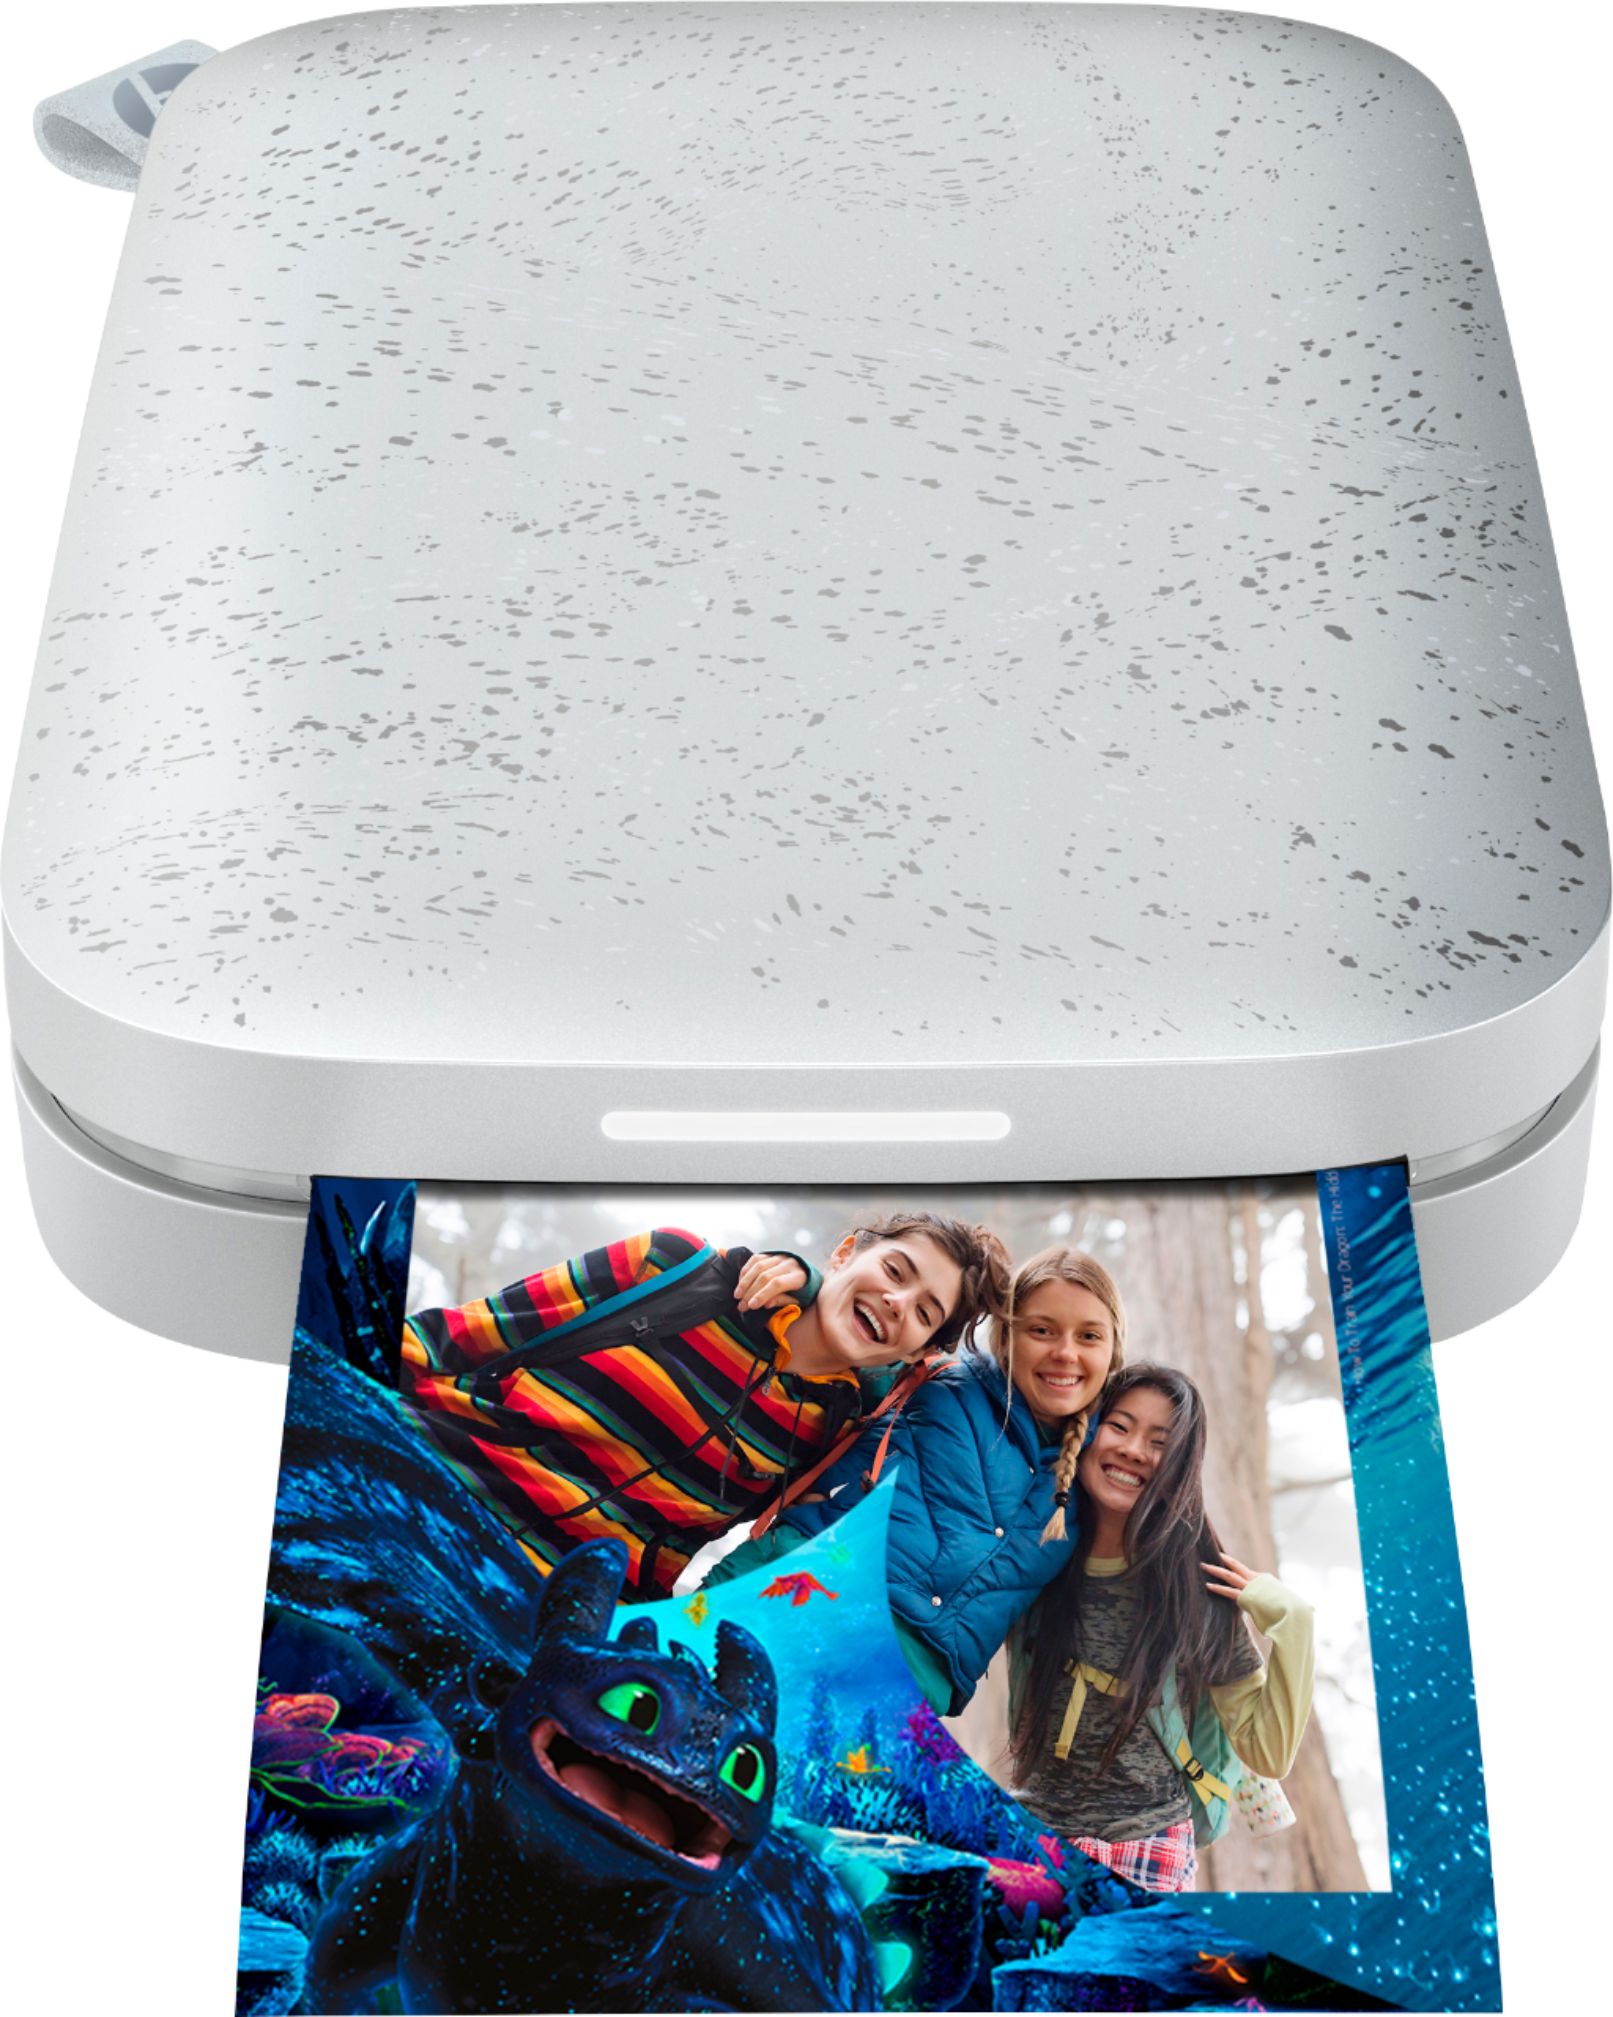 HP Sprocket Portable 2x3 Instant Photo Printer +20 Pack 2x3 Sticky-Backed  Paper